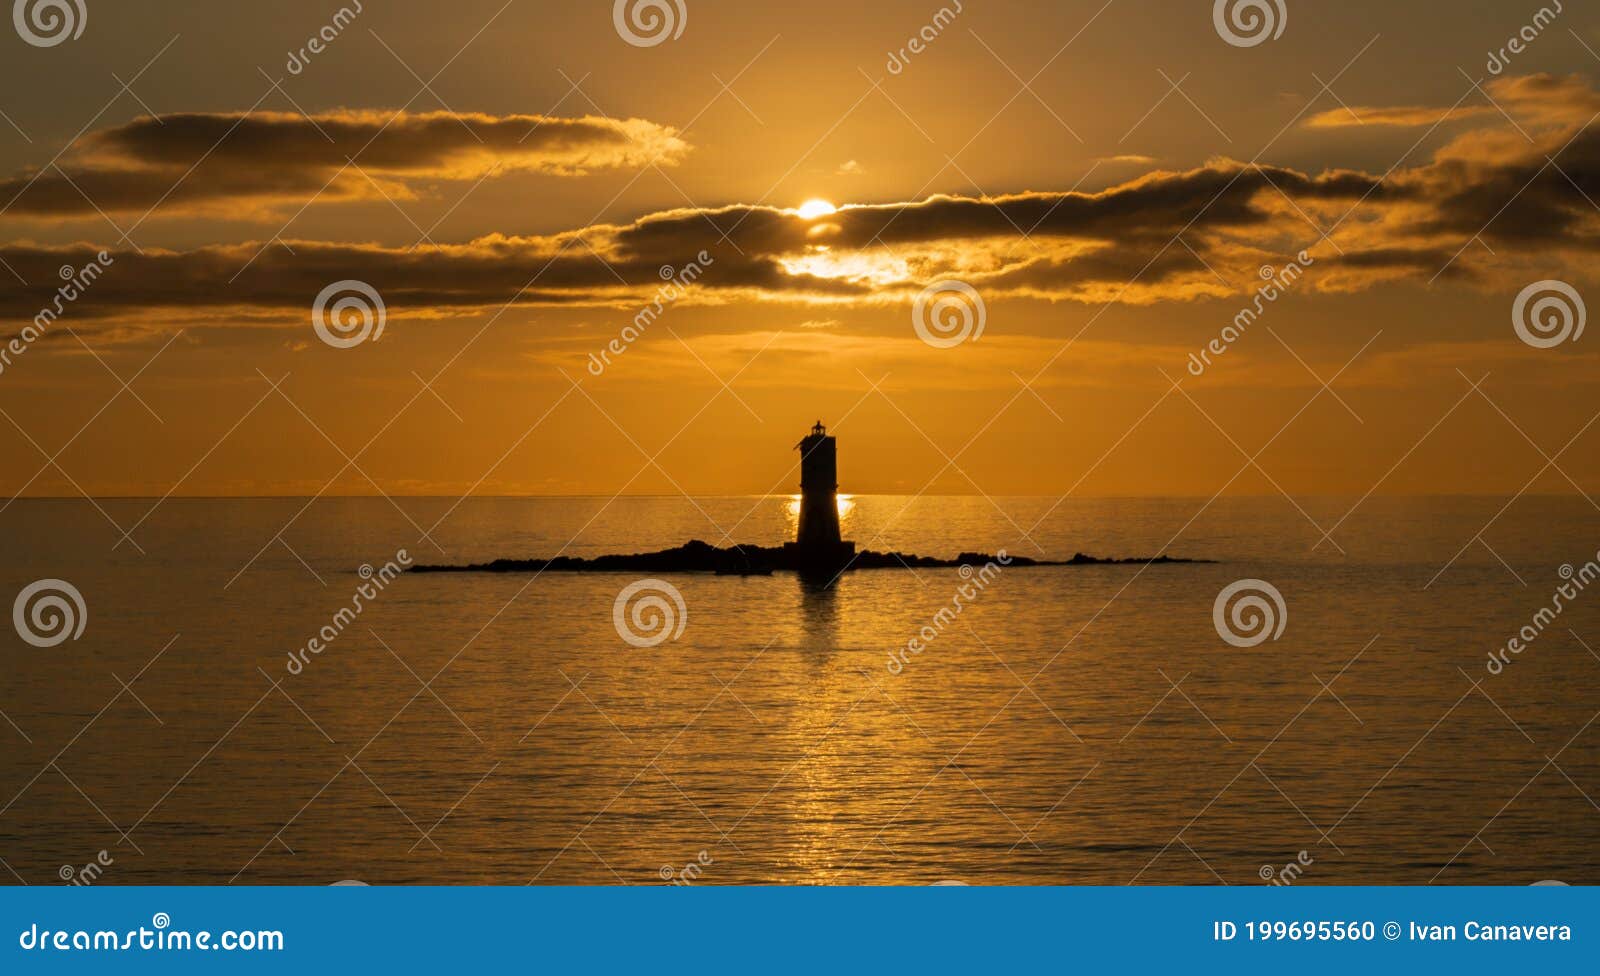 the lighthouse of the mangiabarche on a serene sunset,autumn day